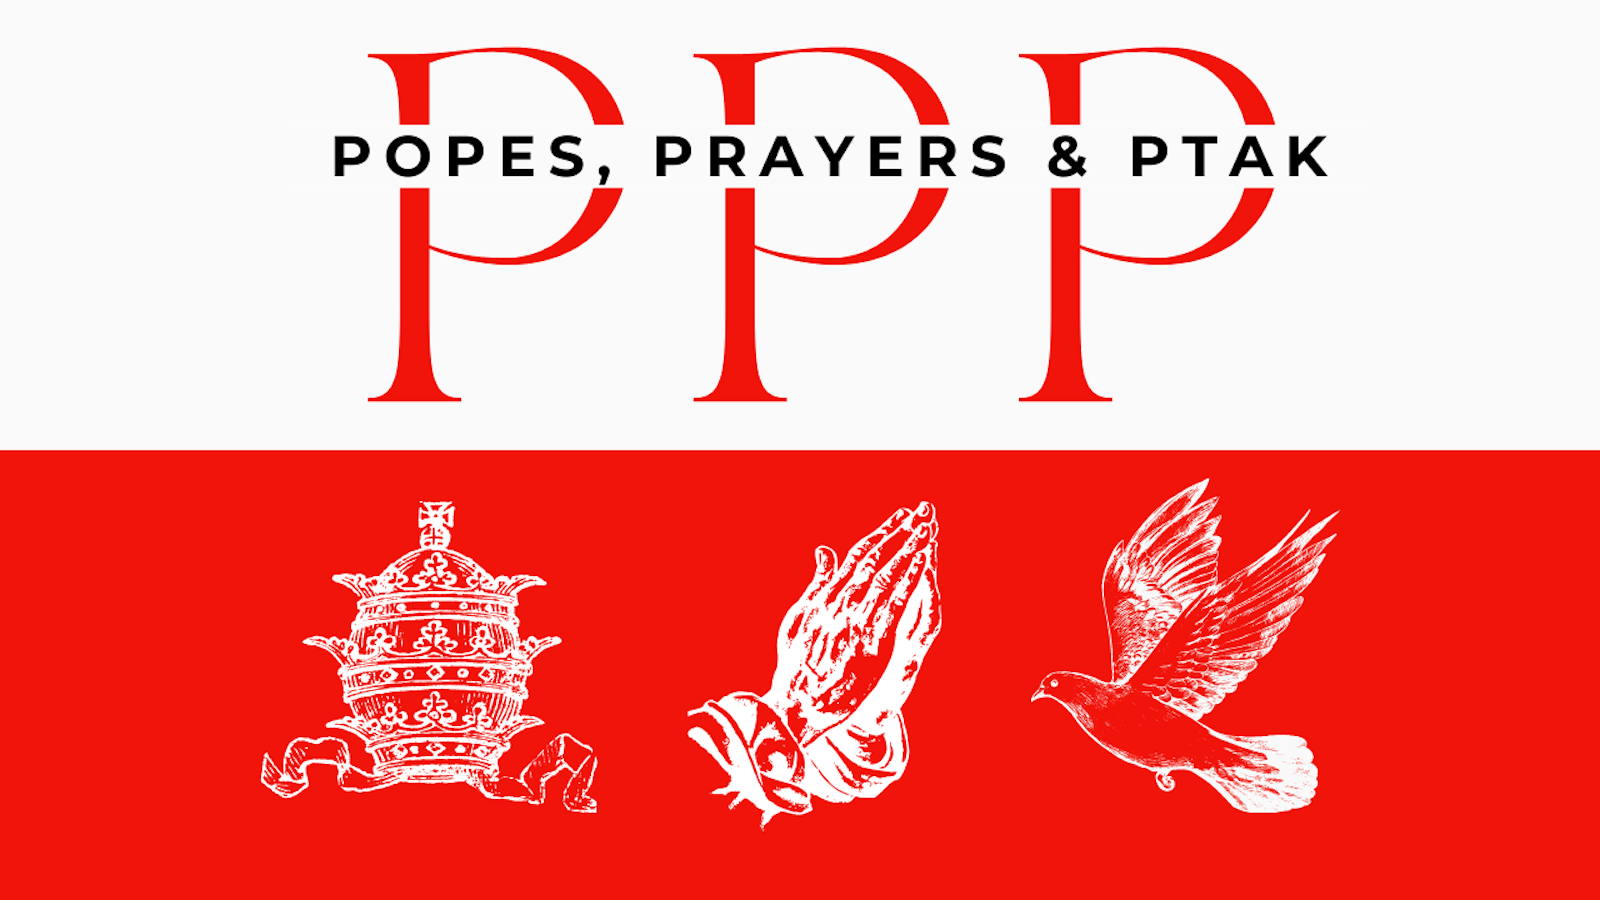 A logo for Fr. Ptak's podcast at Our Lady of Sorrows, "Popes, Prayers & Ptak," designed by Michael Chamberland. (Courtesy of Our Lady of Sorrows Parish)